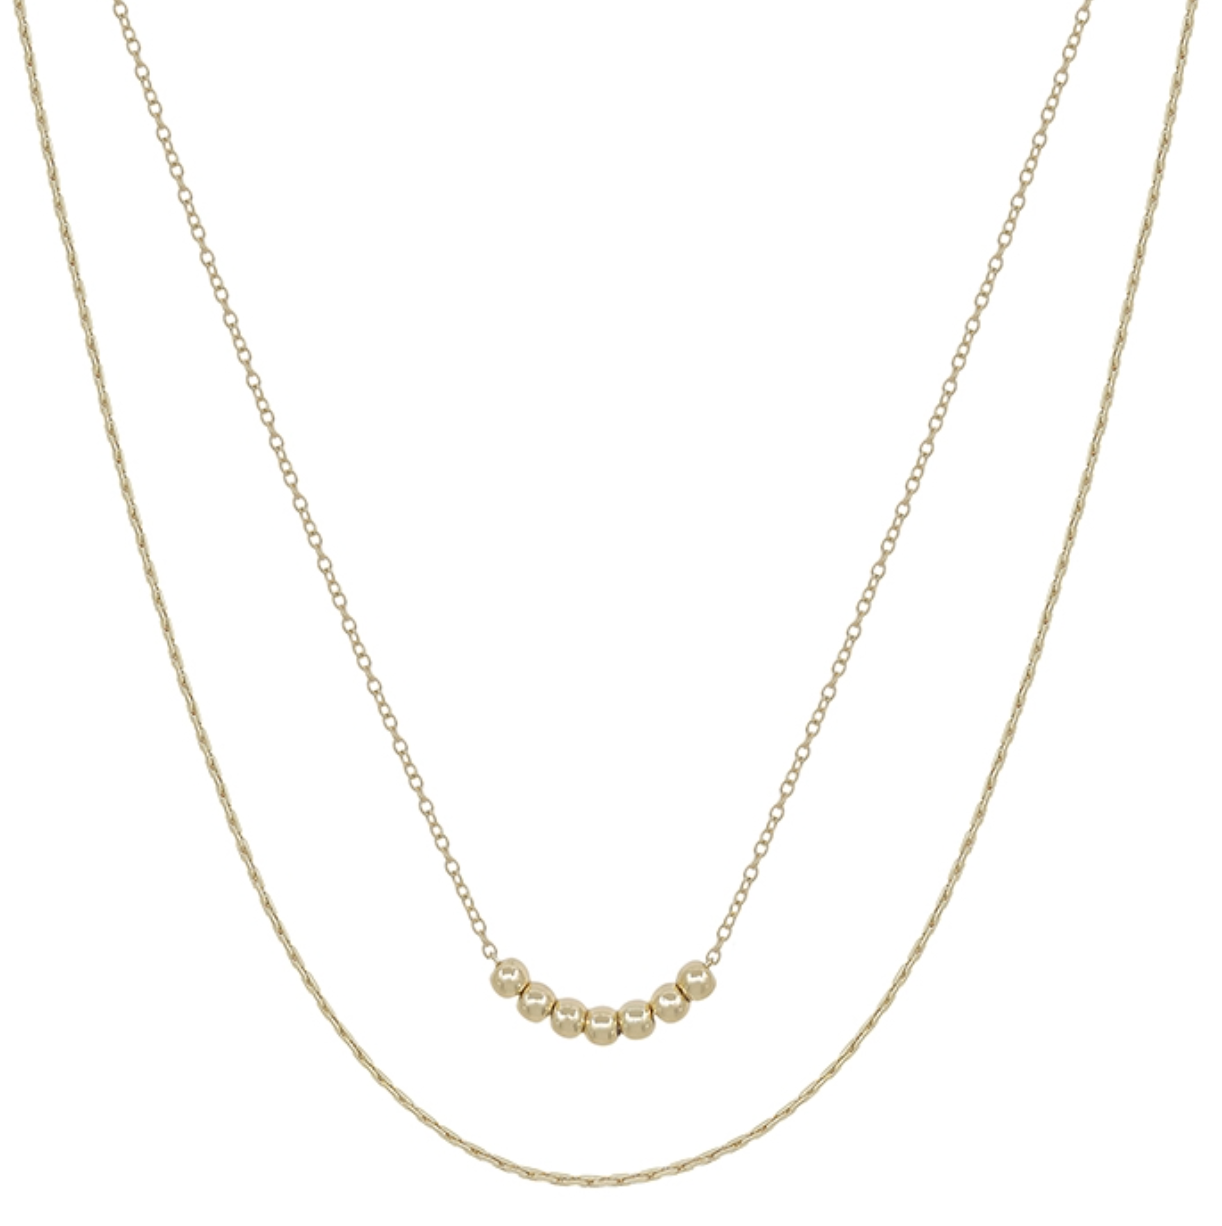 Gold Dainty Layered Chain Necklace